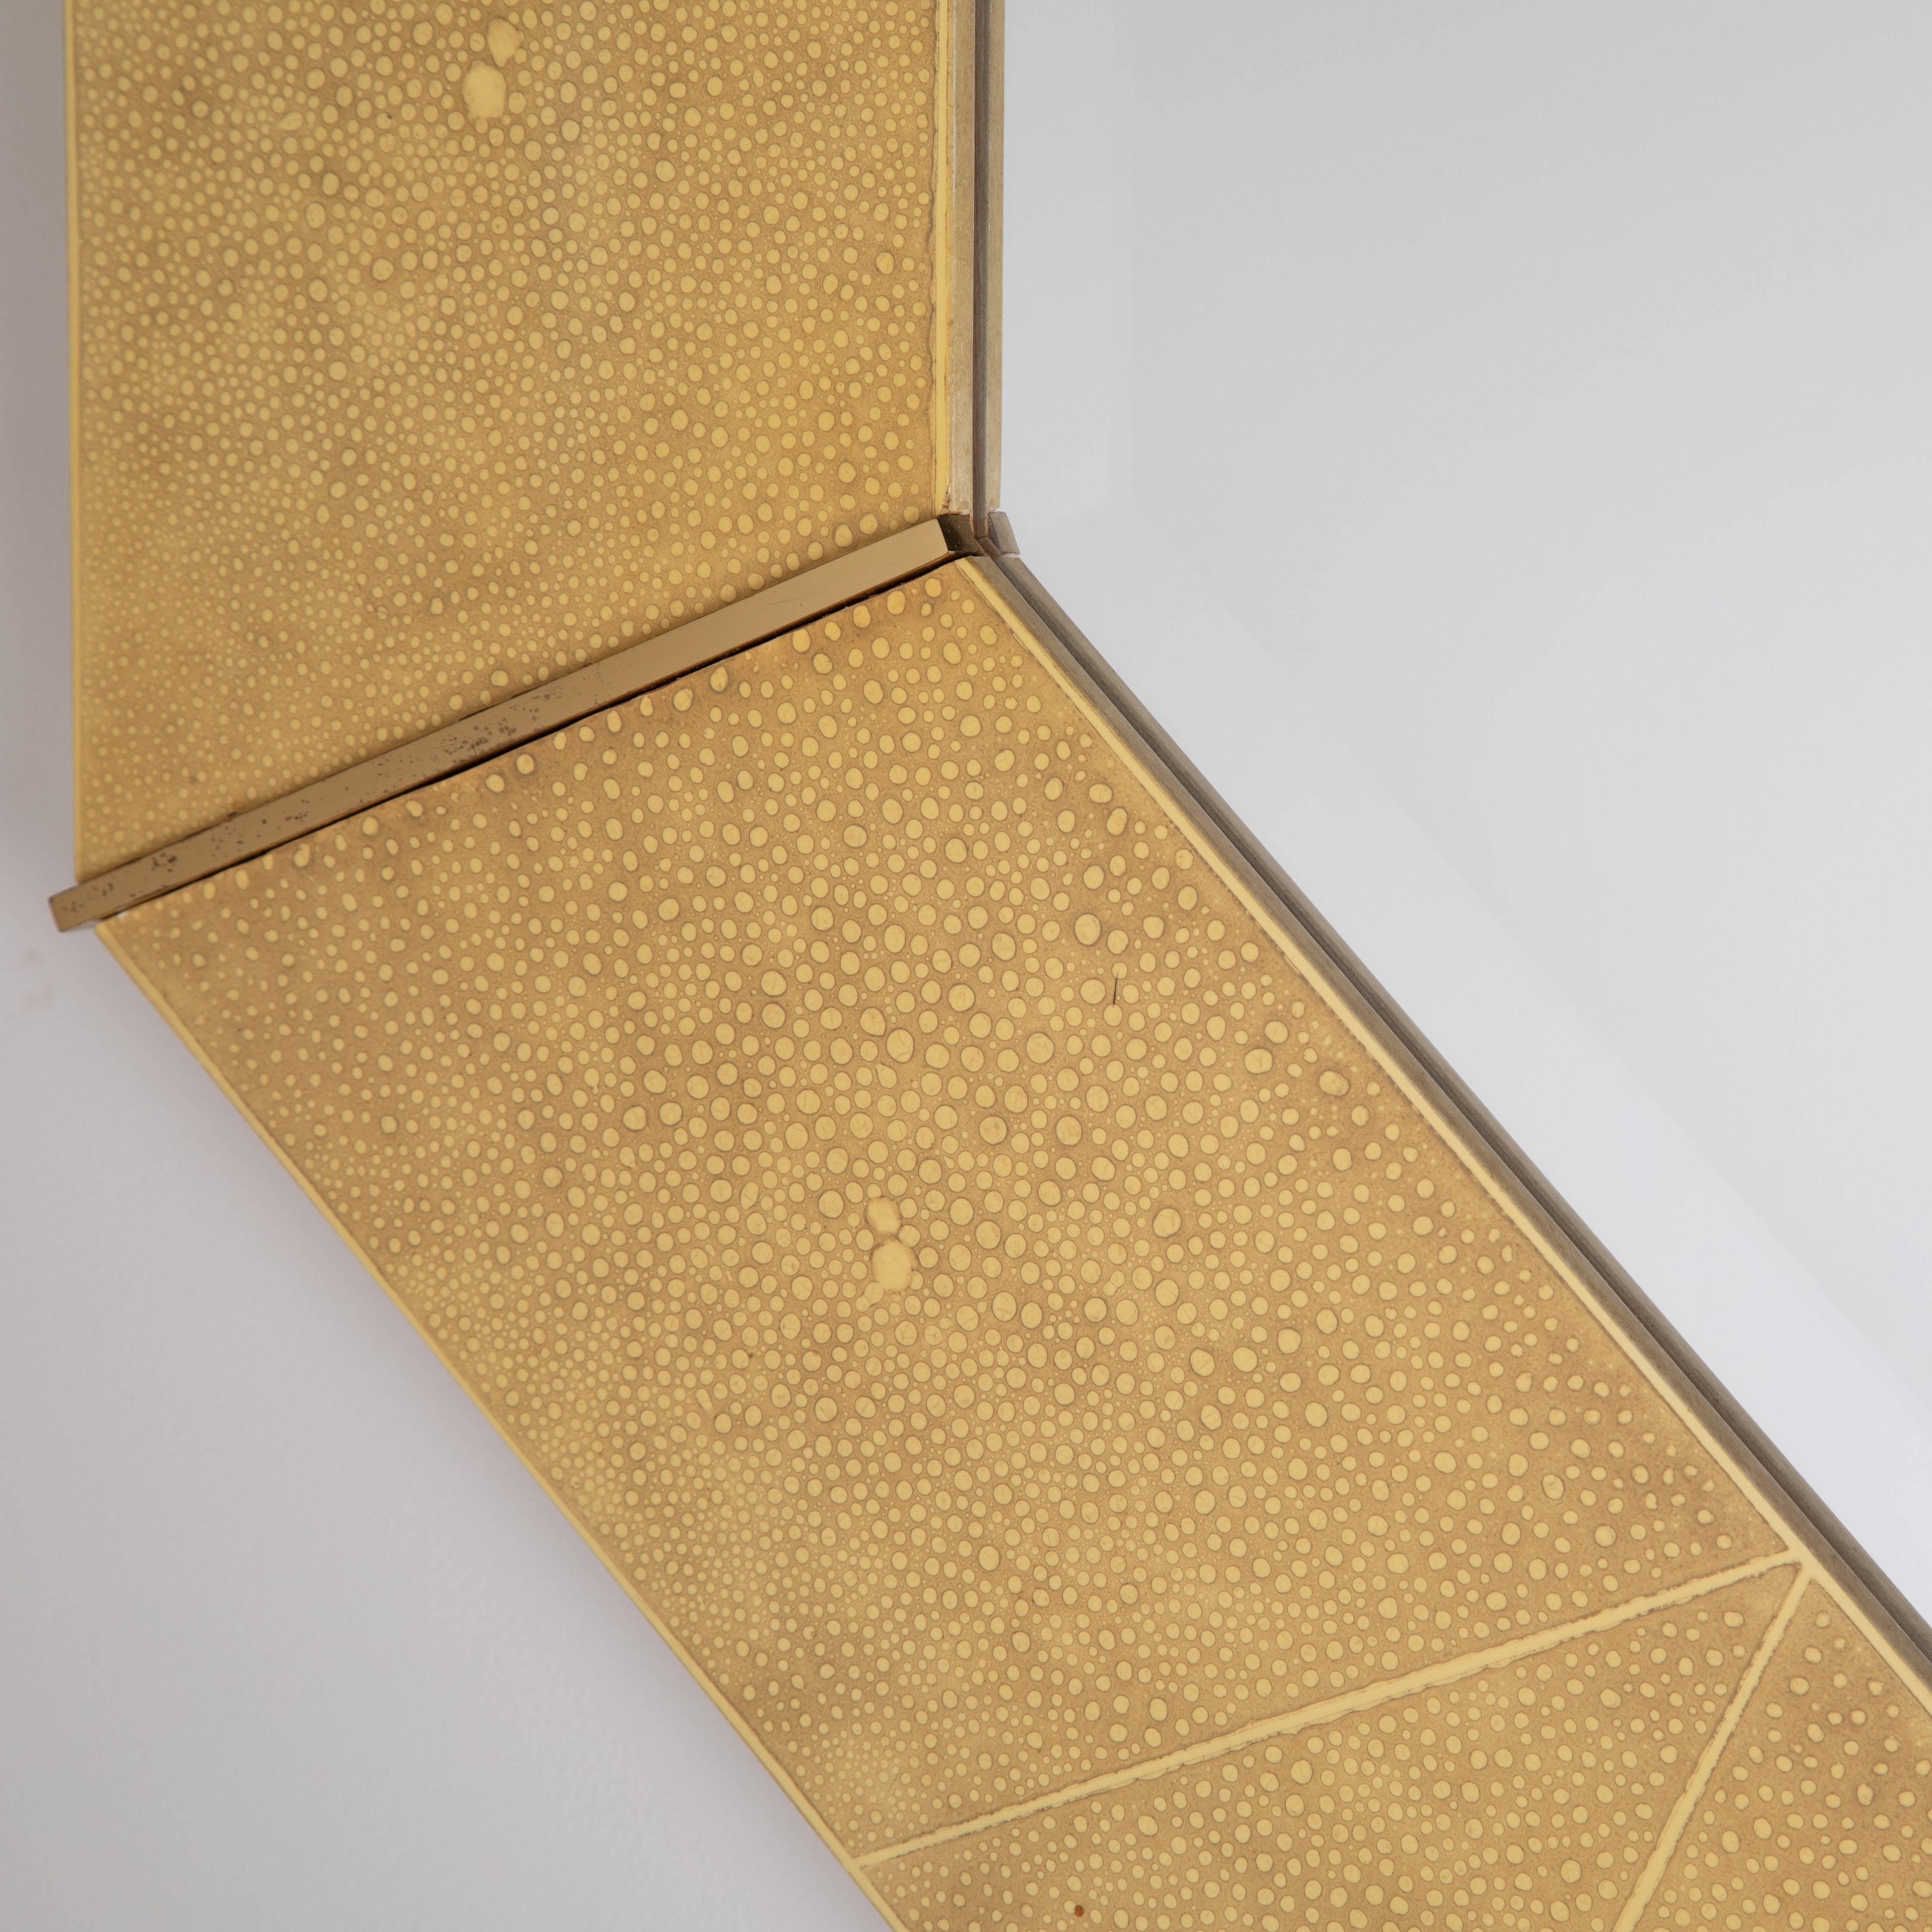 Octagonal Faux-Shagreen and Brass Mirror by Karl Springer, Circa 1970s For Sale 6